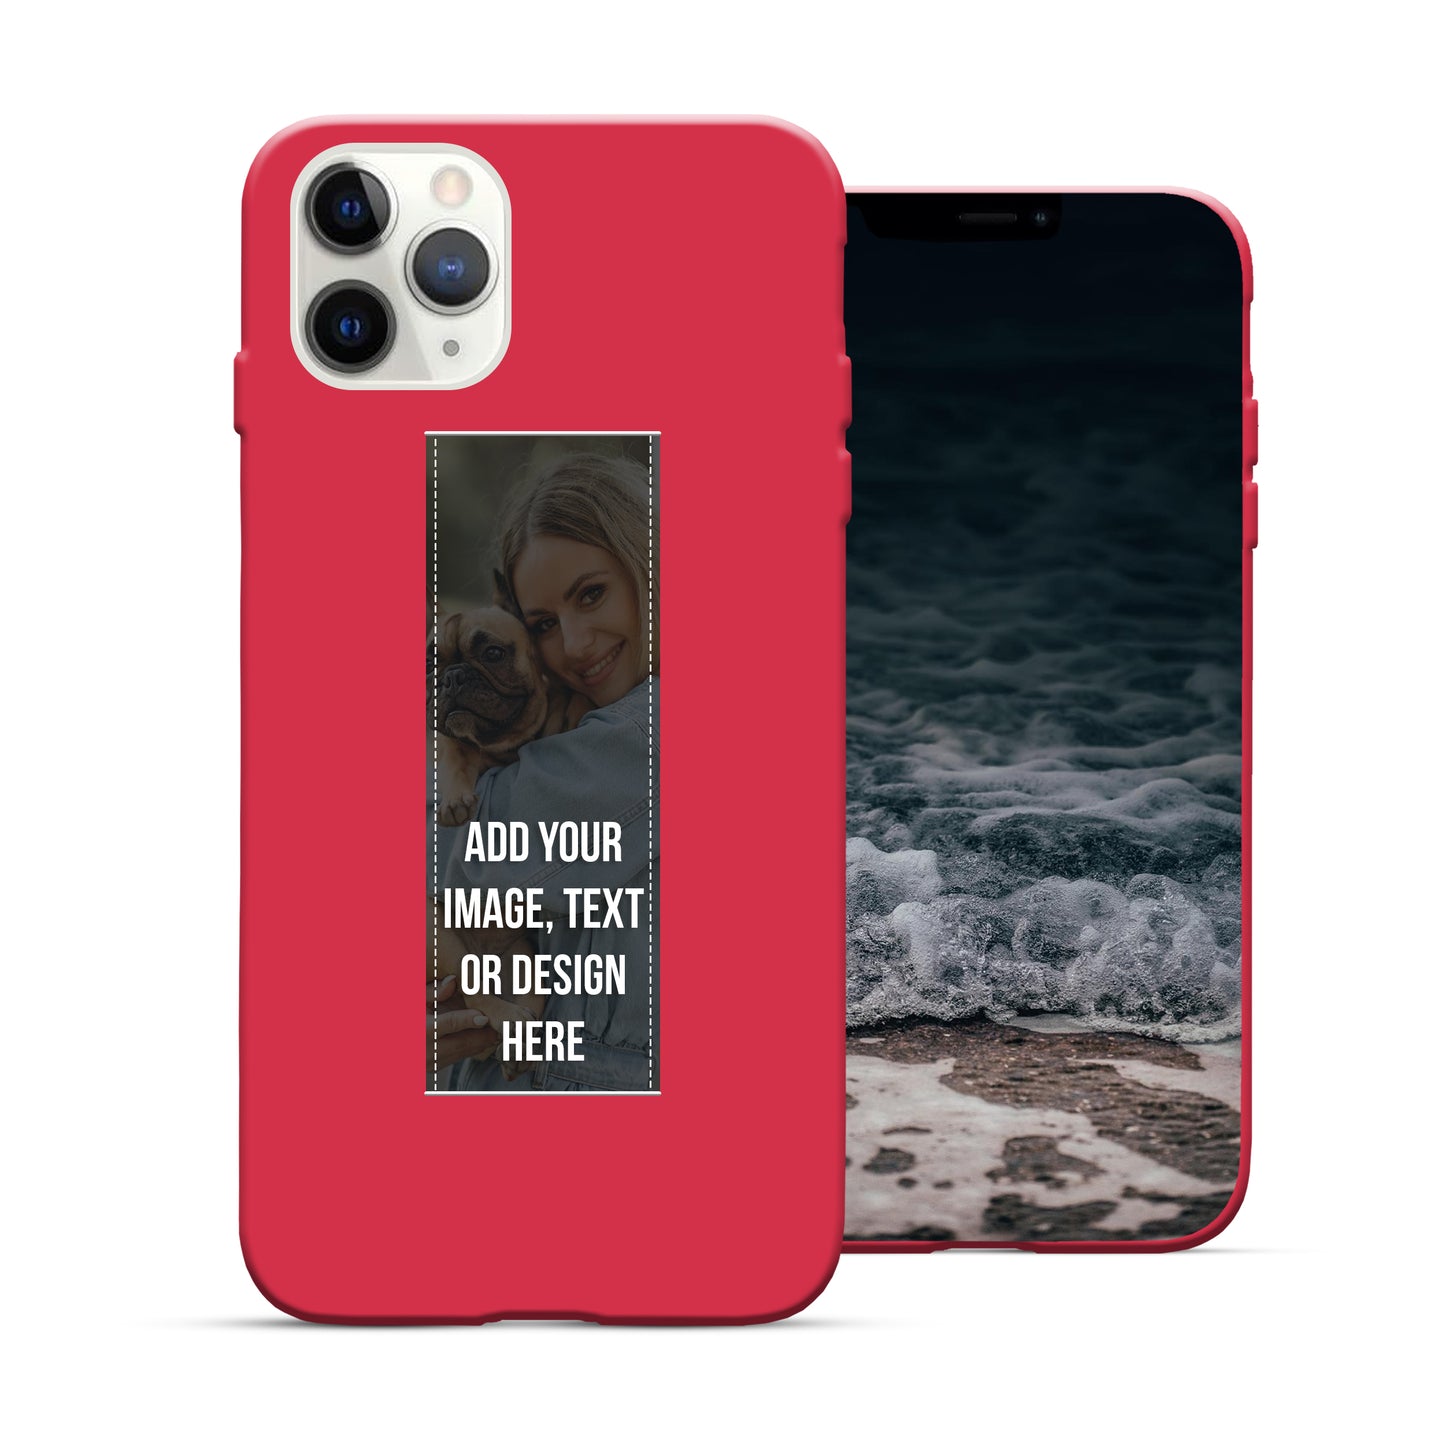 Finger Loop Phone Case For iPhone 11 Pro Max Red With Custom Strap